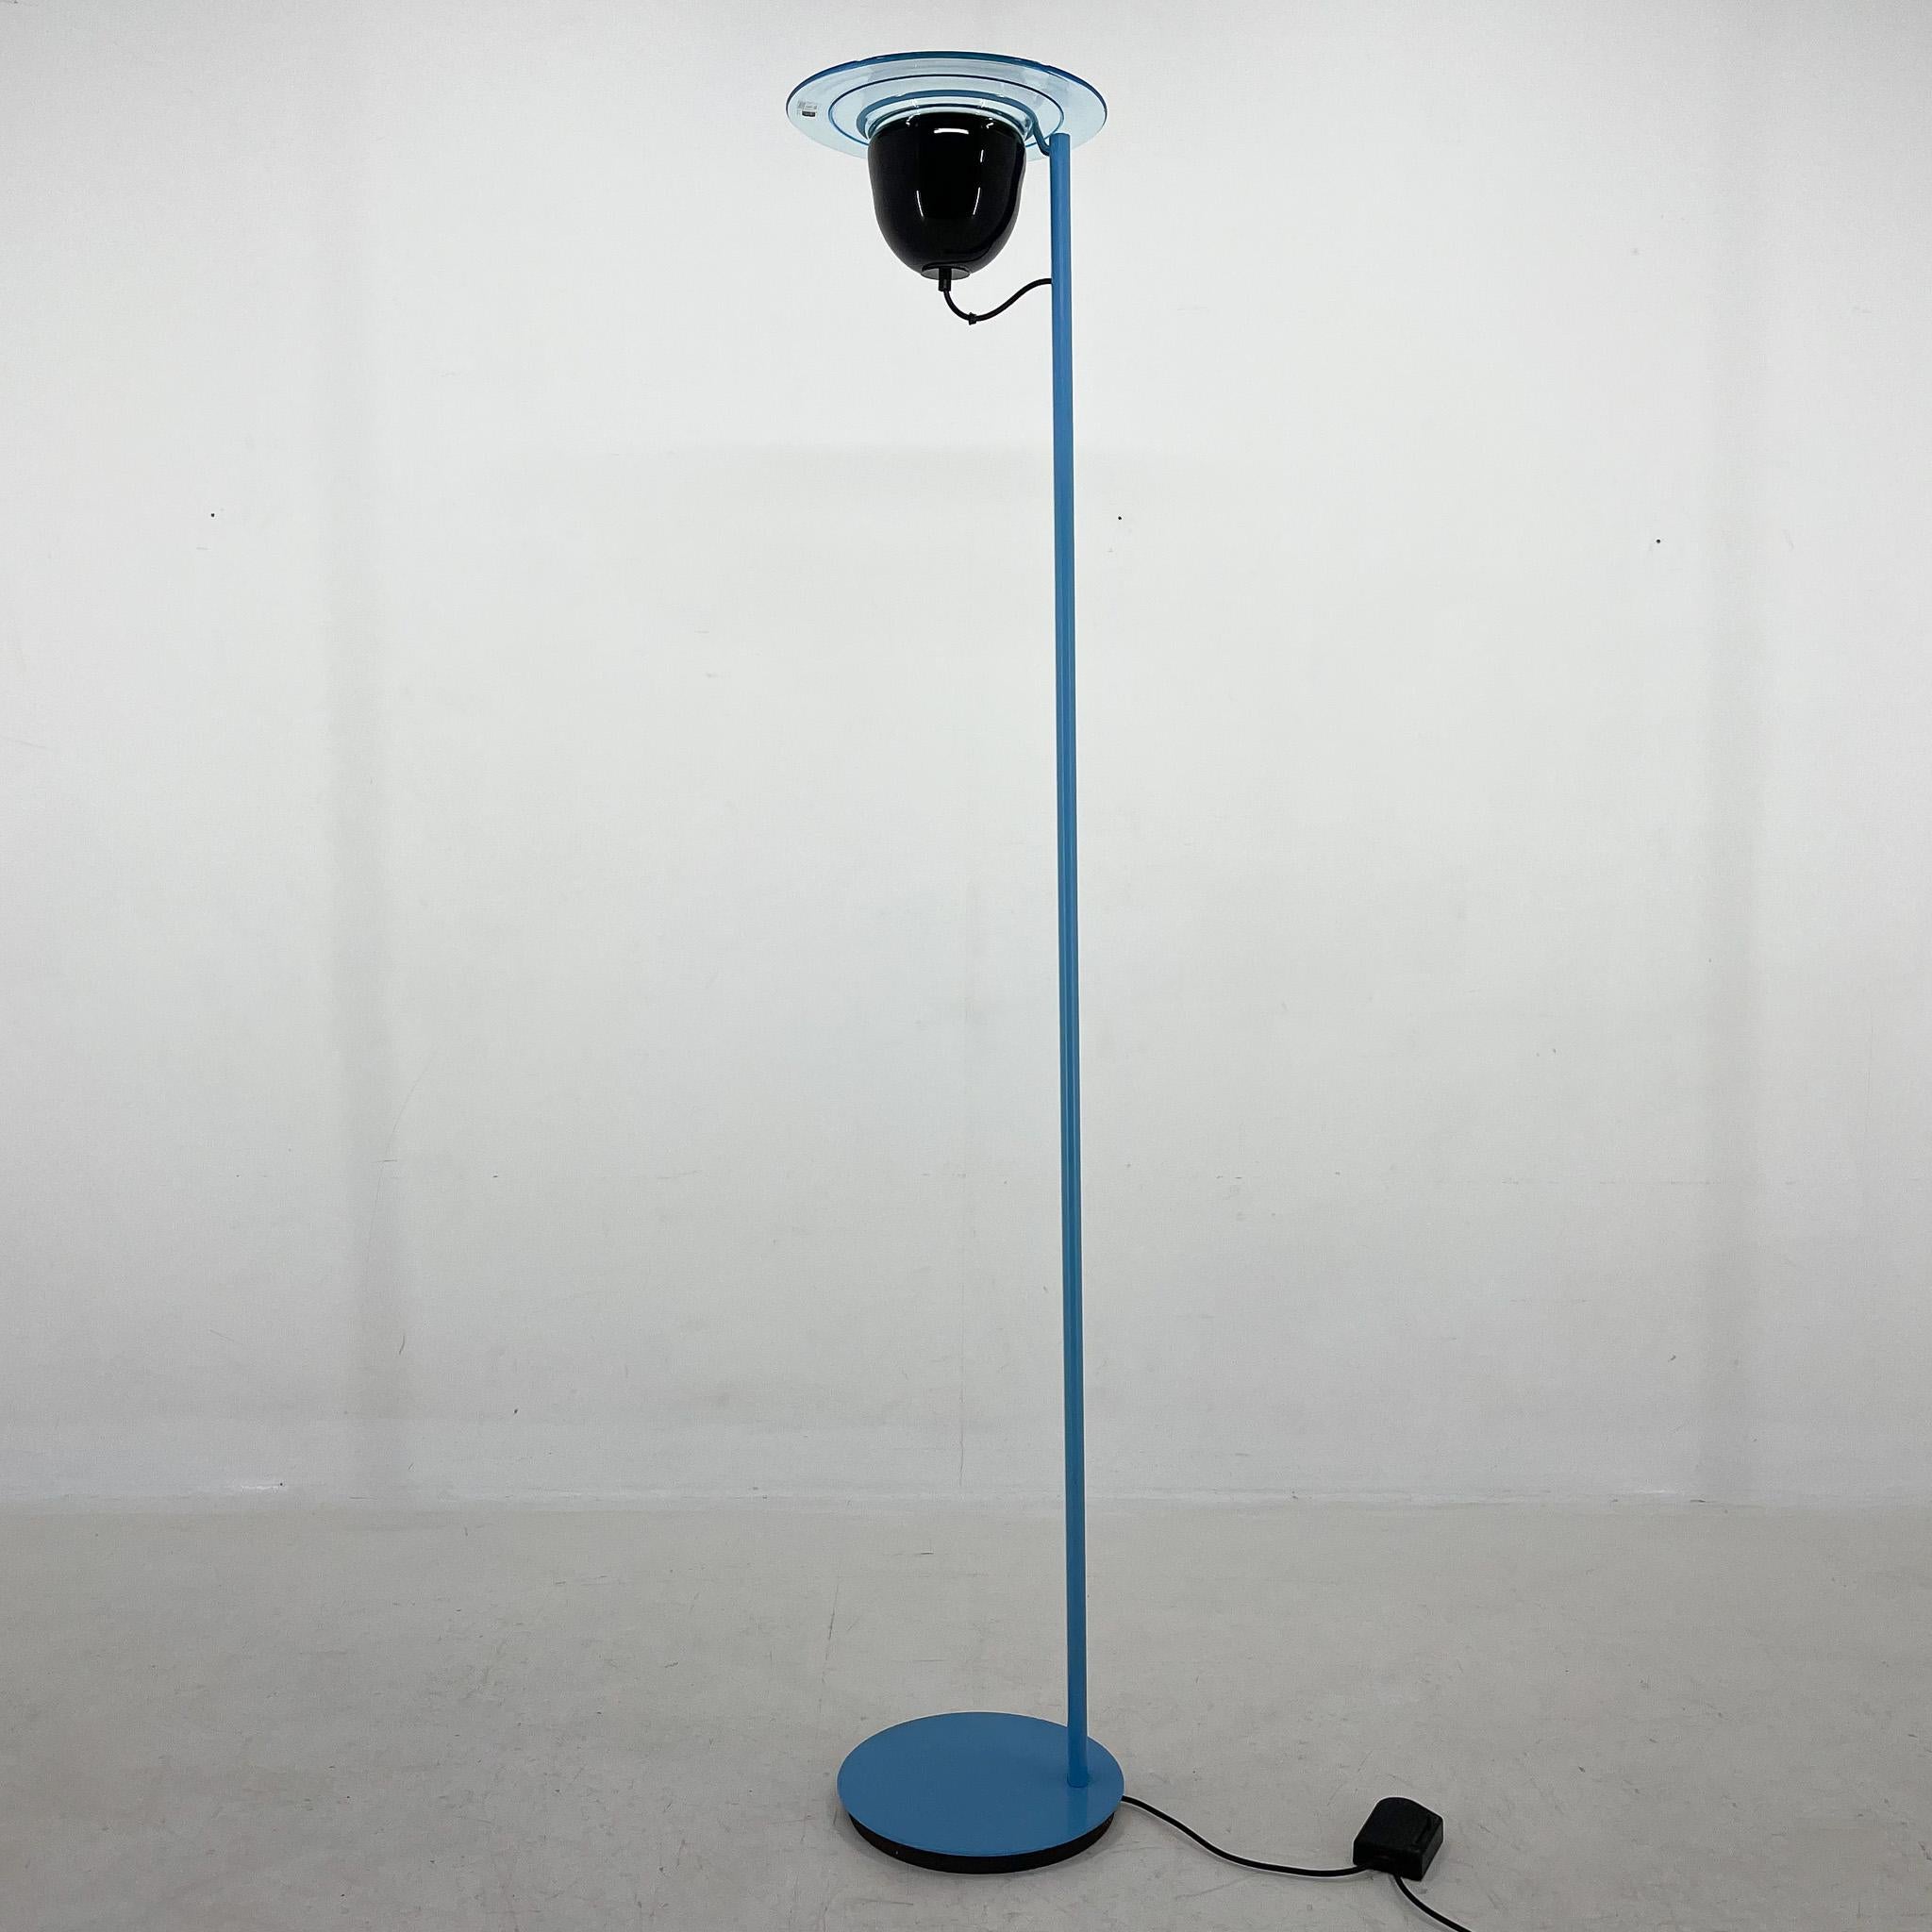 Rare vintage blue metal and Murano glass floor Lamp by Vetri Murano with original dimmer. Made in Italy in the 1970's.